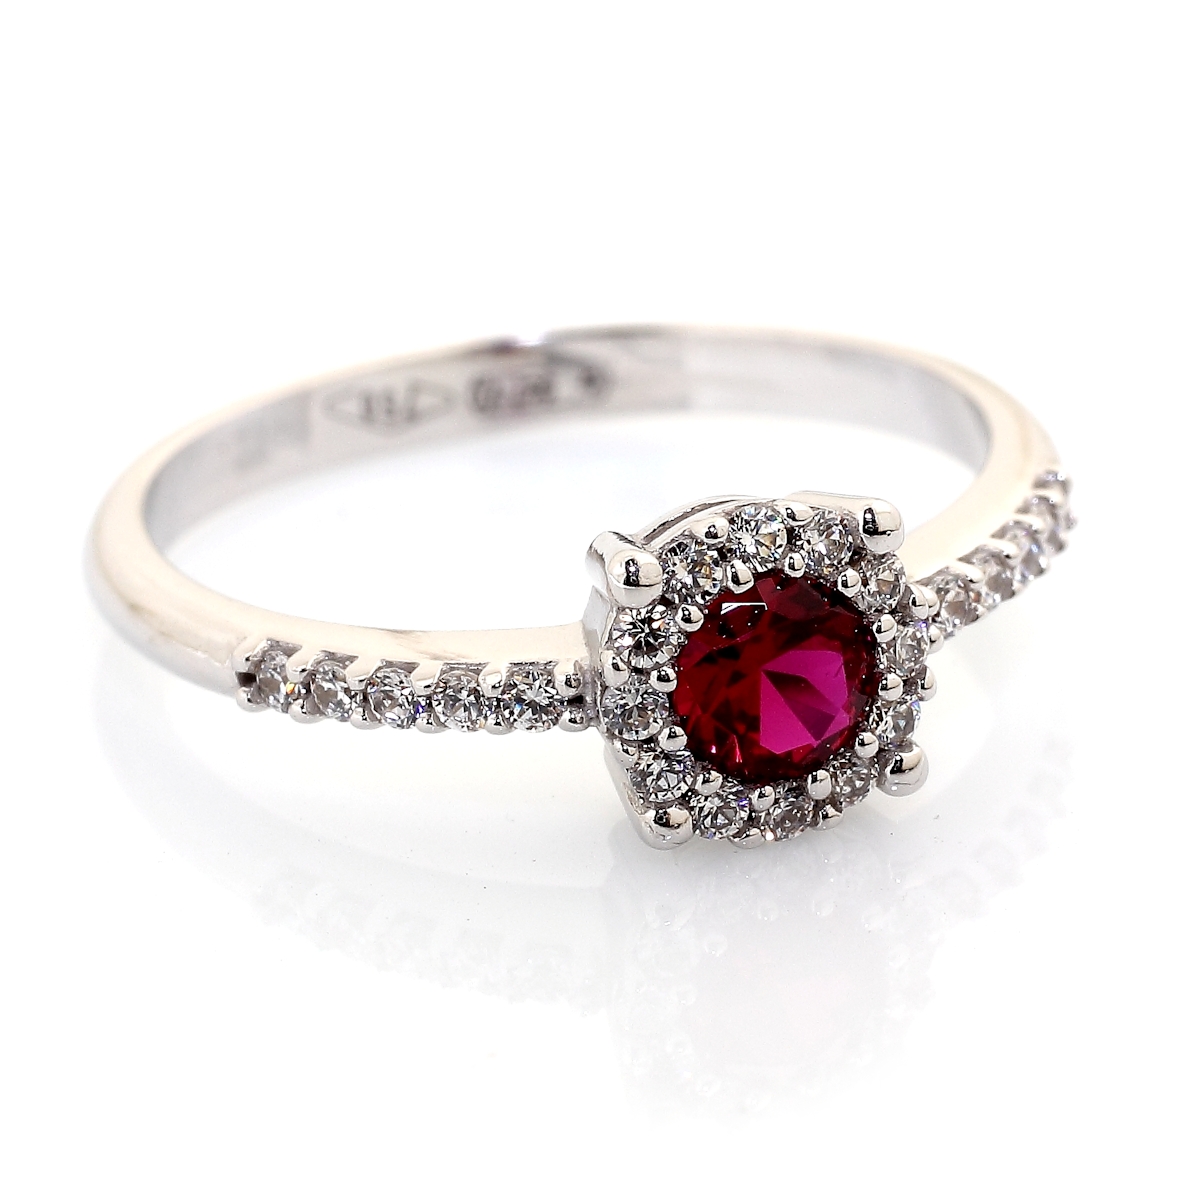 750 Mill. White Gold Ring with Red & White Cubic Zirconia Size N-3/4